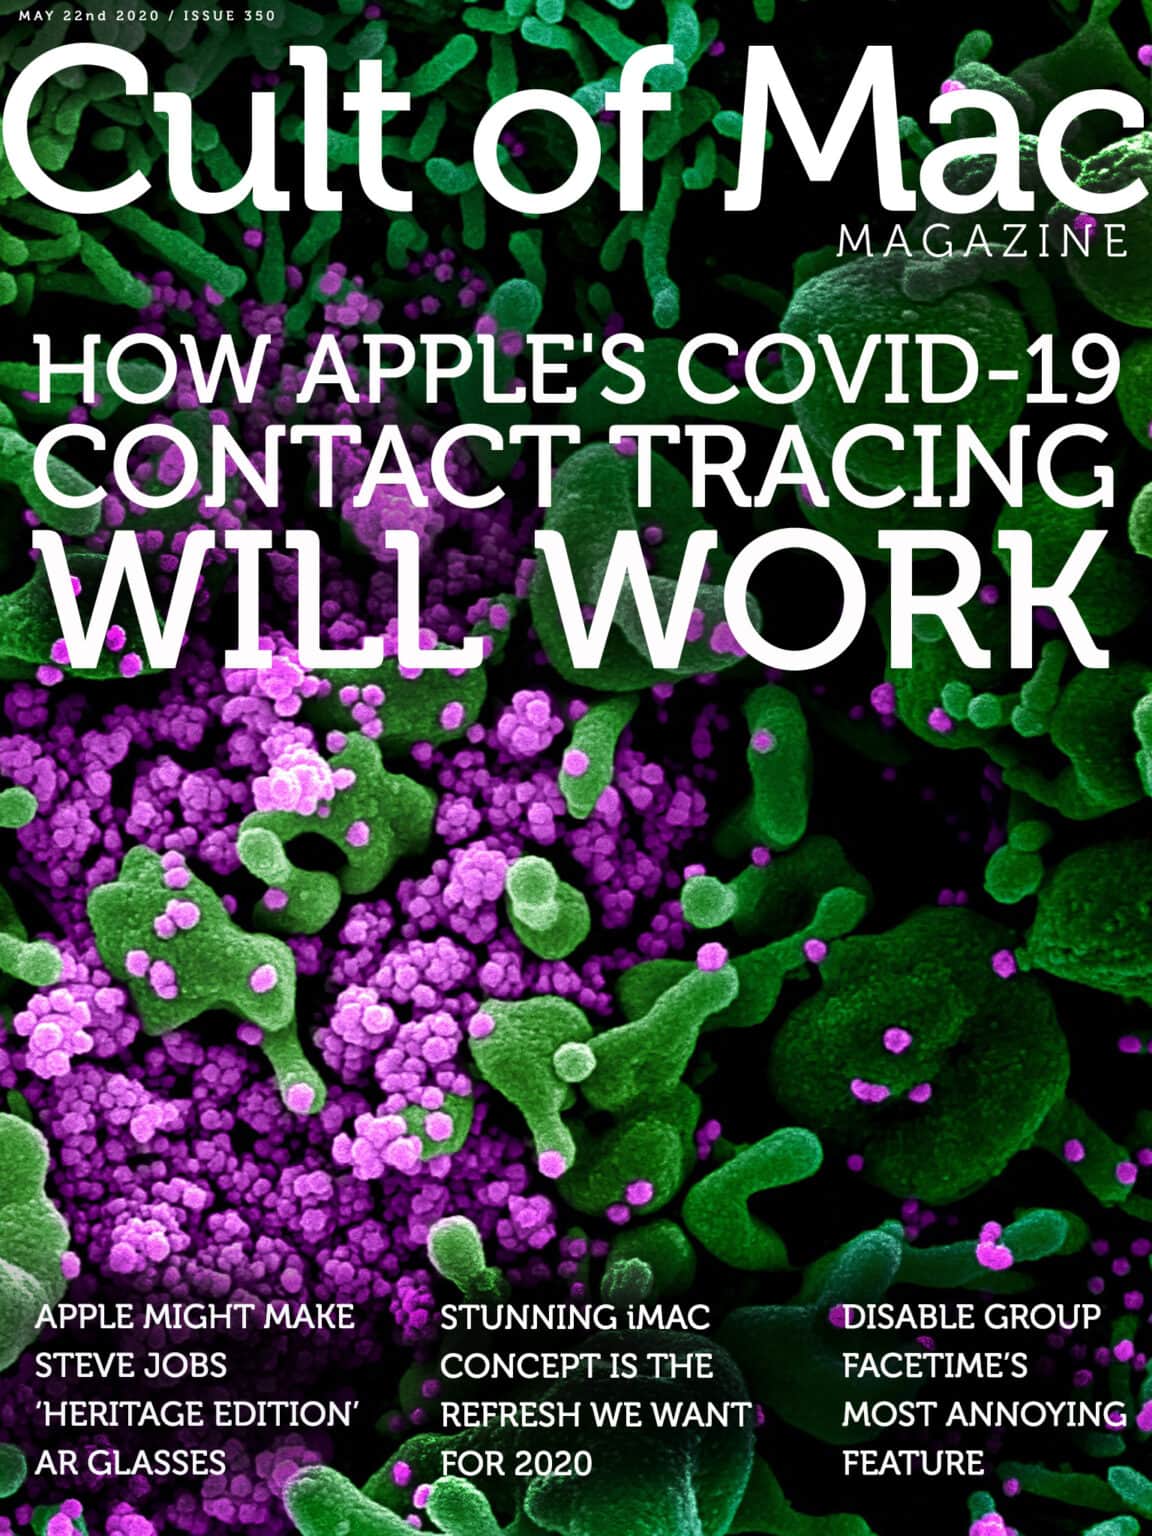 Here's how Apple's COVID-19 contact-tracing system works.